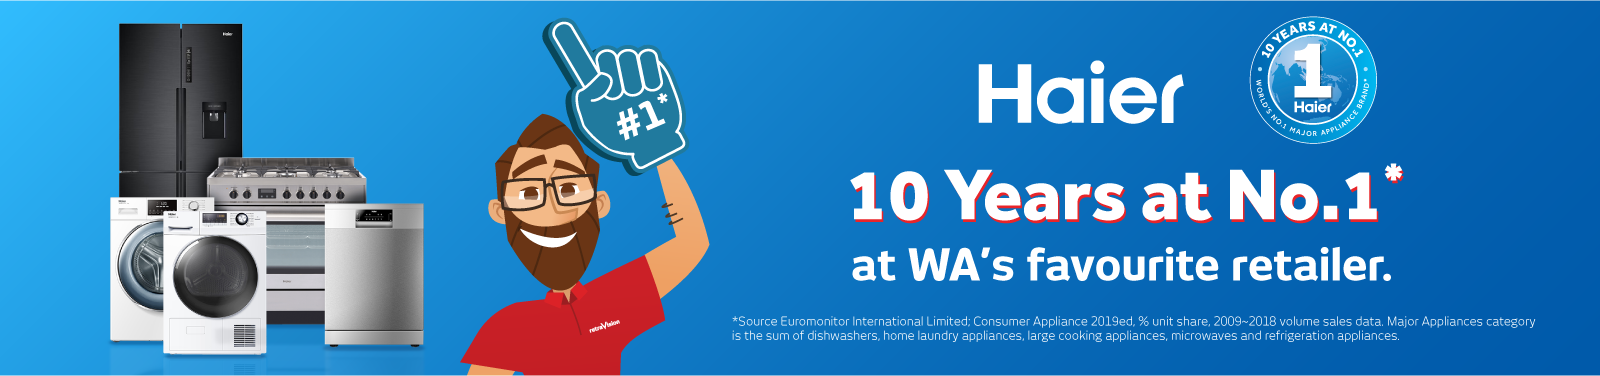 Haier 10 Year At #1 Brand Campaign